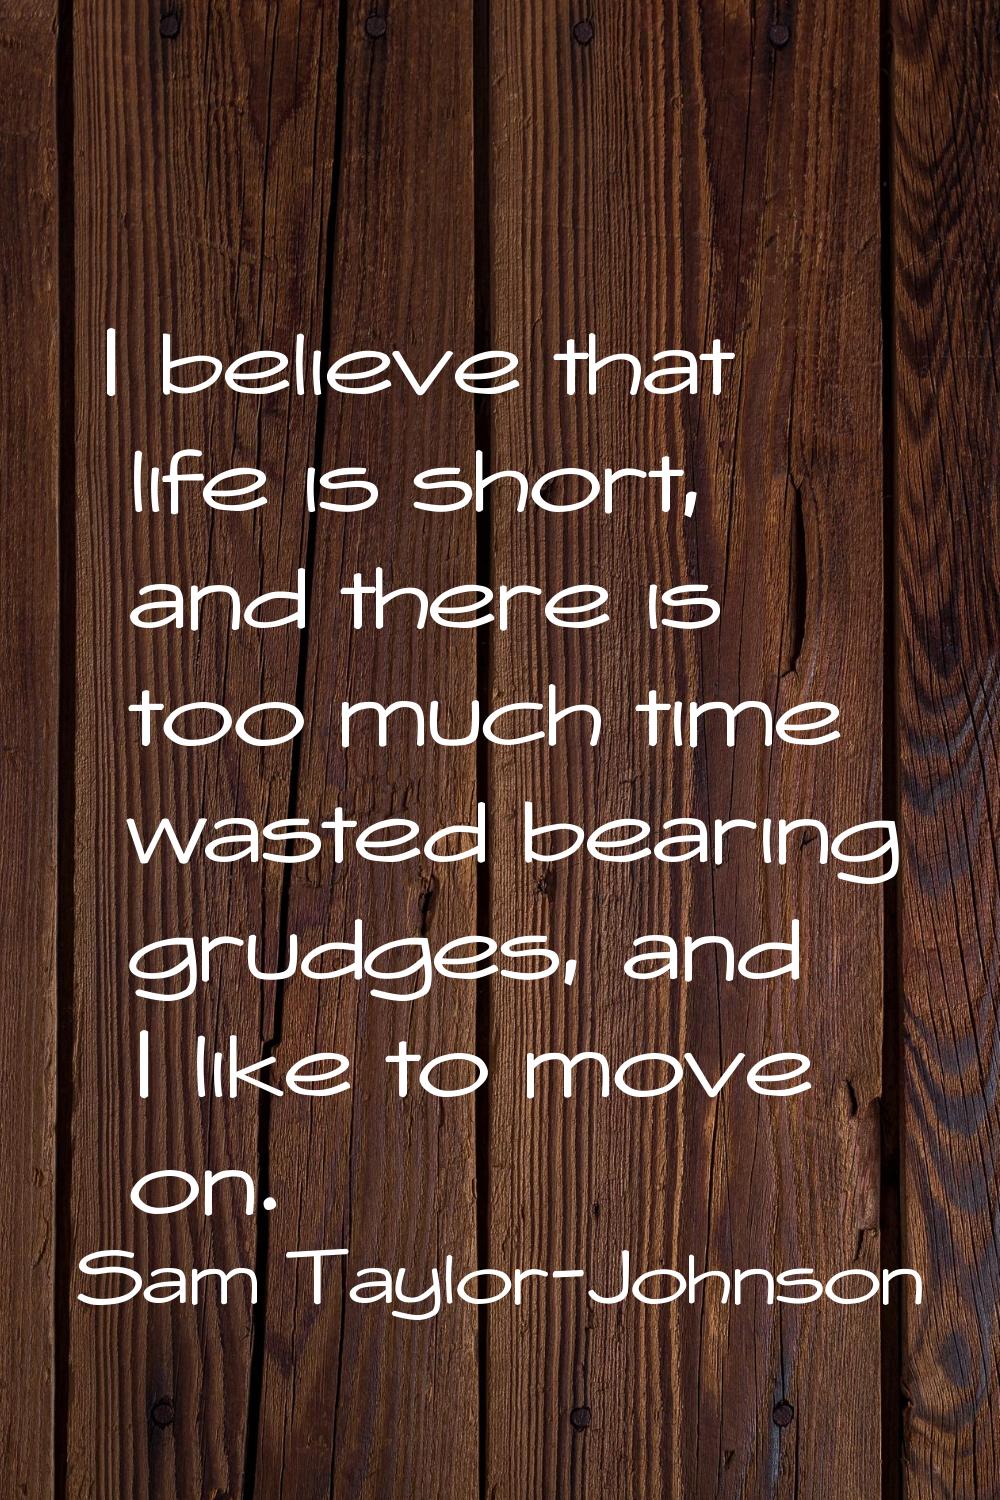 I believe that life is short, and there is too much time wasted bearing grudges, and I like to move